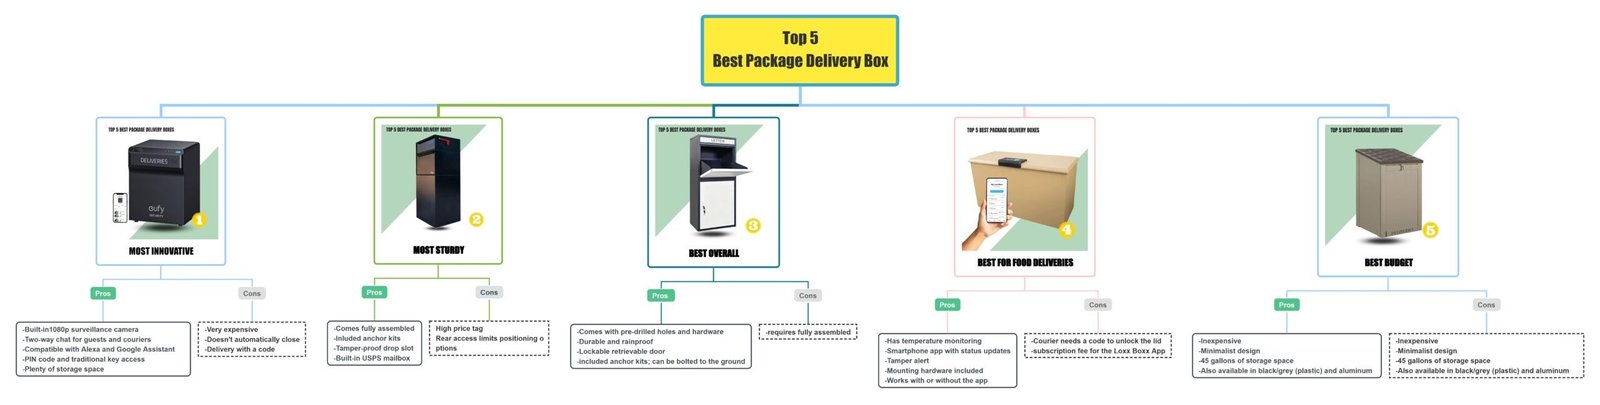 Top 5 best package delivery boxes comparisons with the pros and cons 